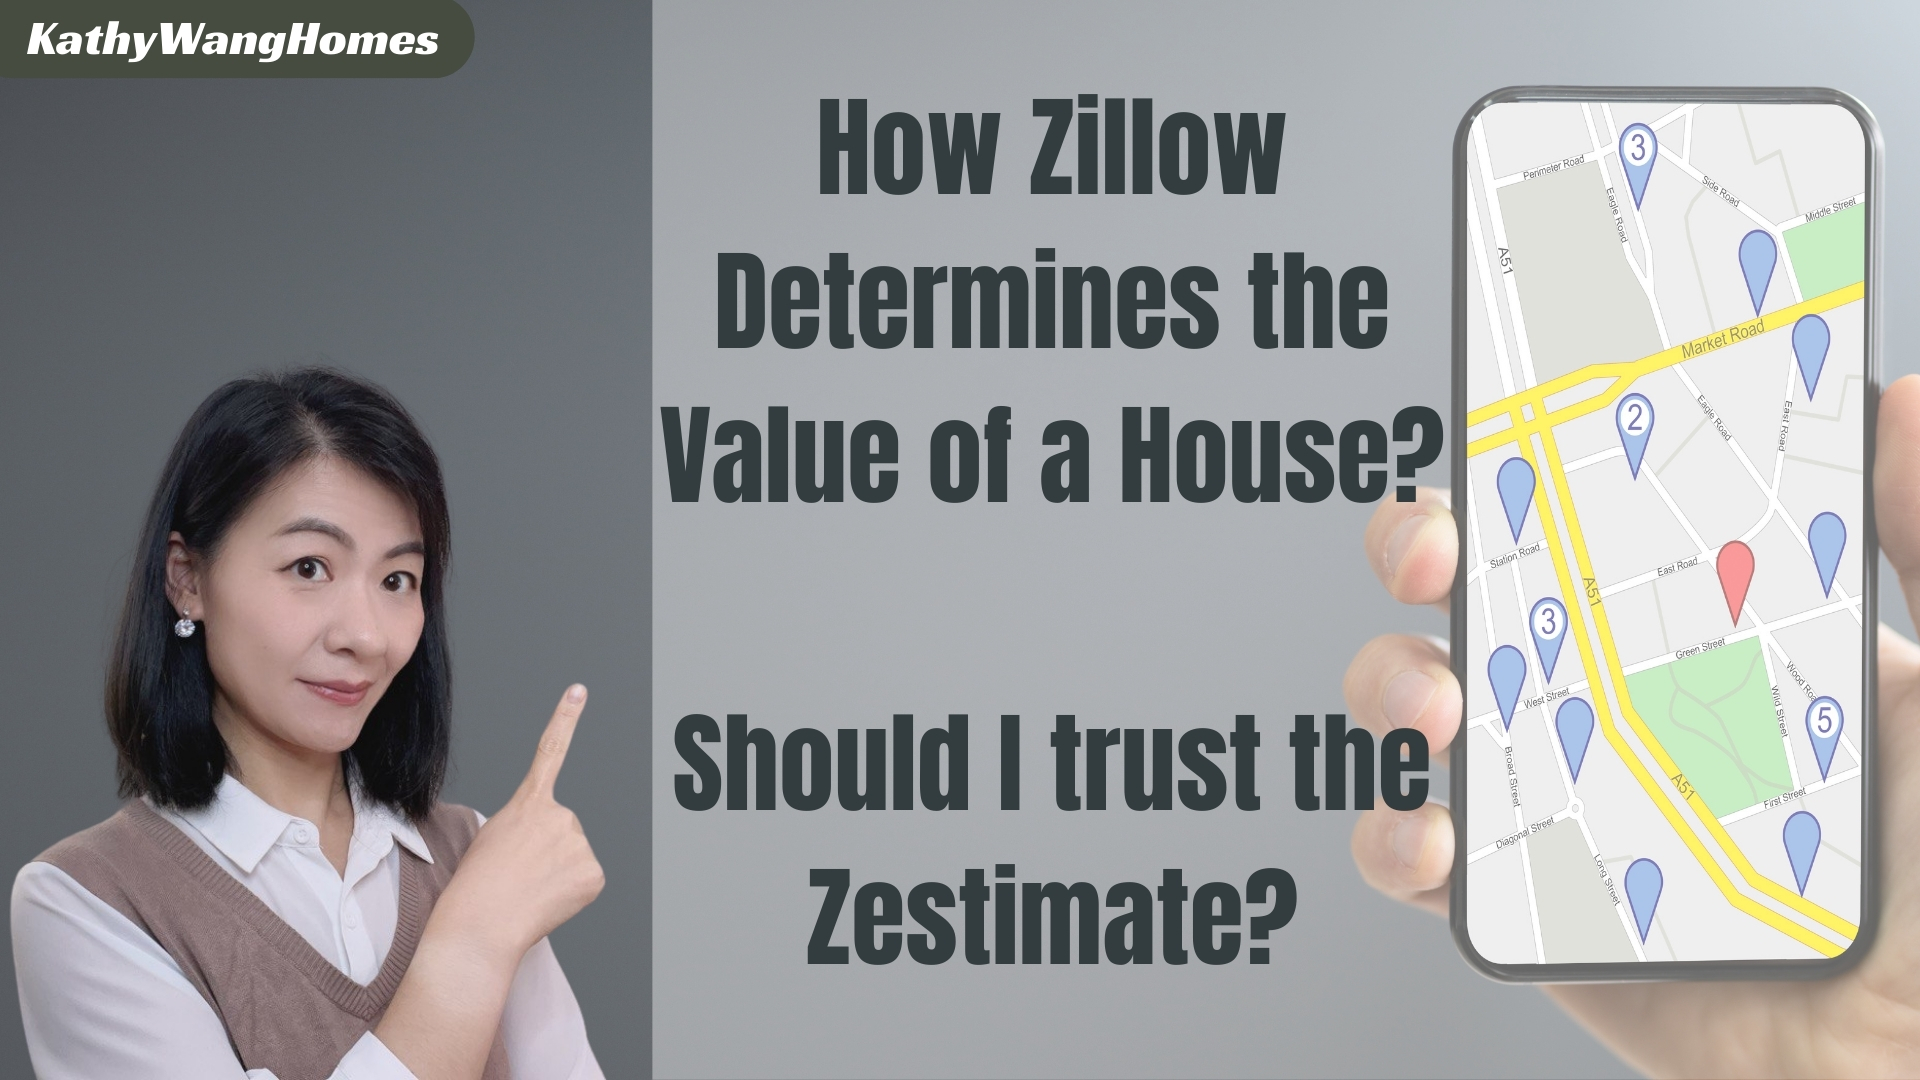 How Zillow determines the value of a house? Should I trust the Zestimate?